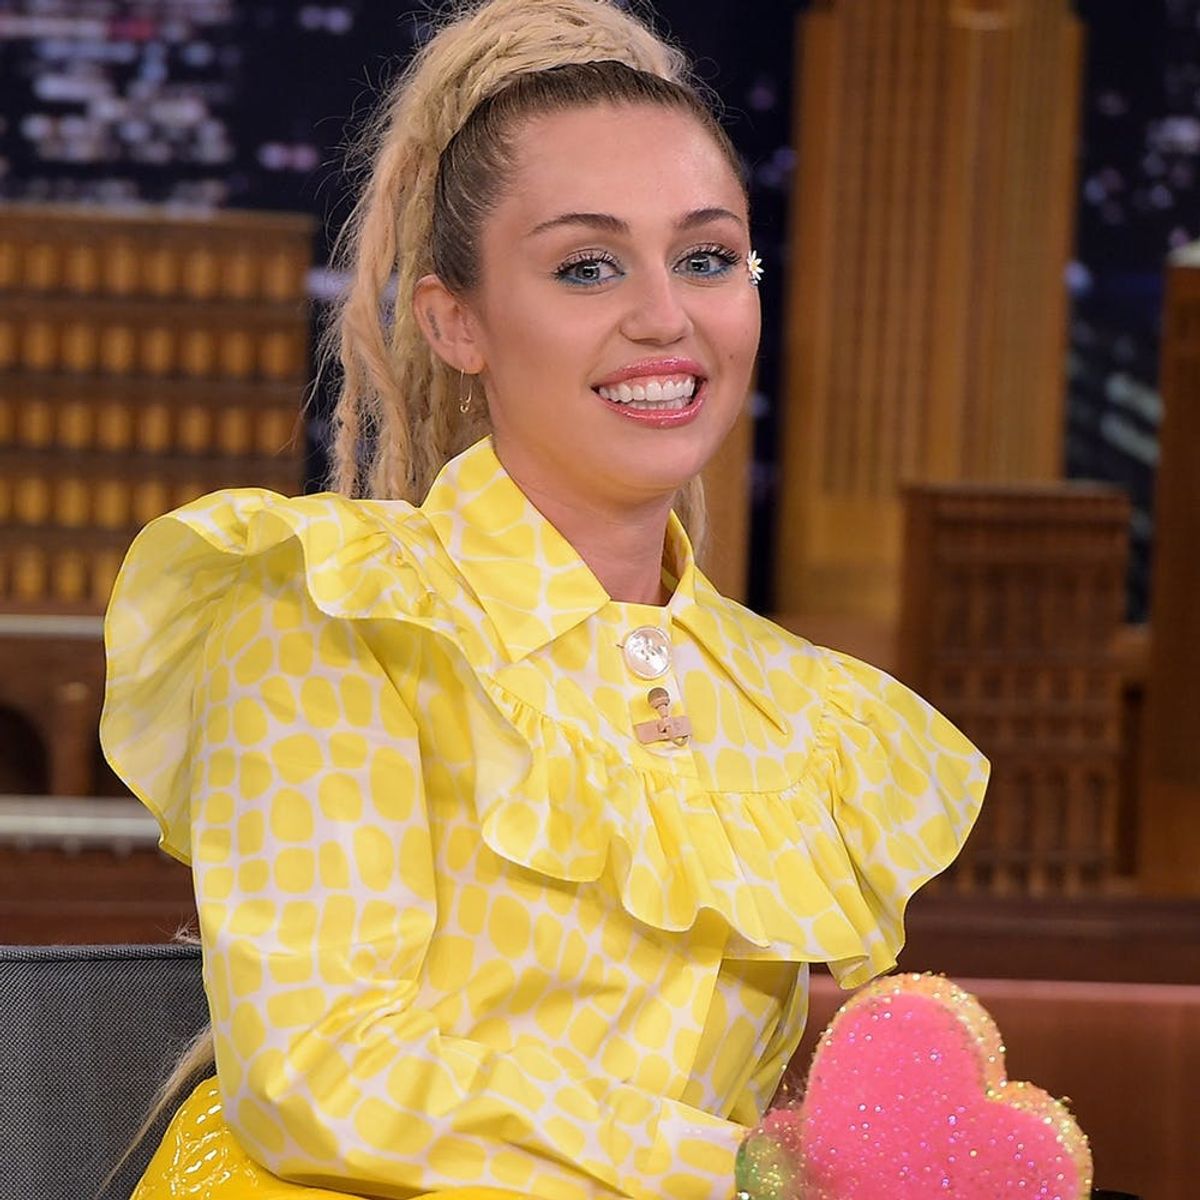 Miley Cyrus Just Got the Most ‘70s Inspired Haircut Ever